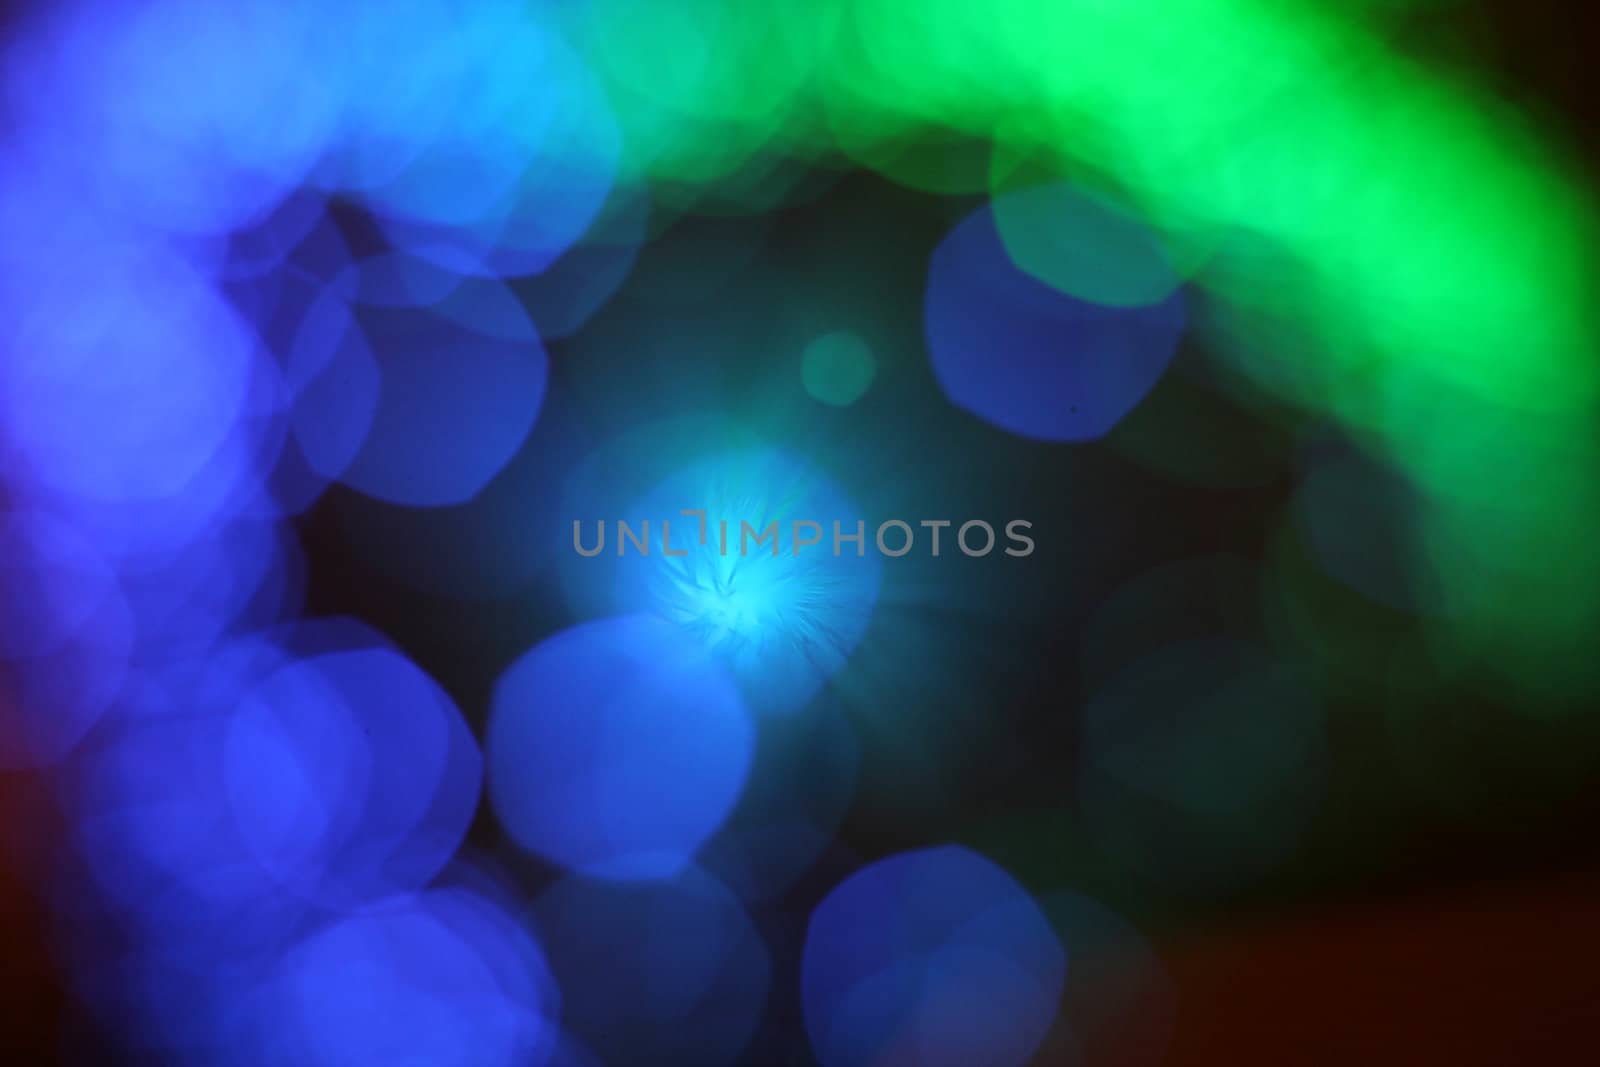 abstract blurred lights